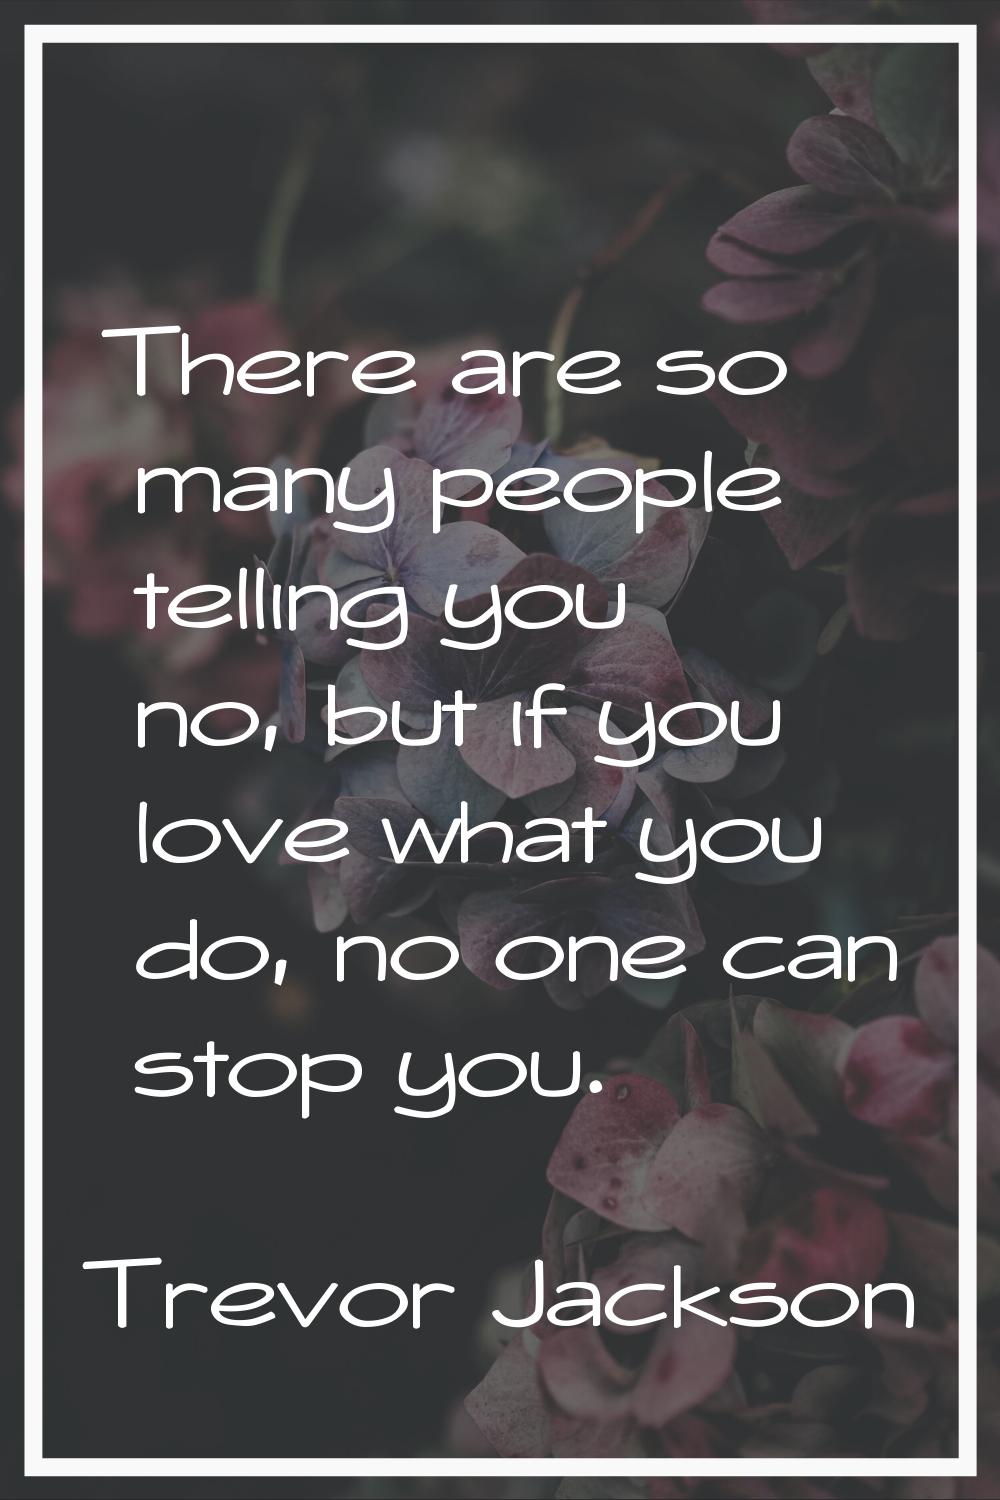 There are so many people telling you no, but if you love what you do, no one can stop you.